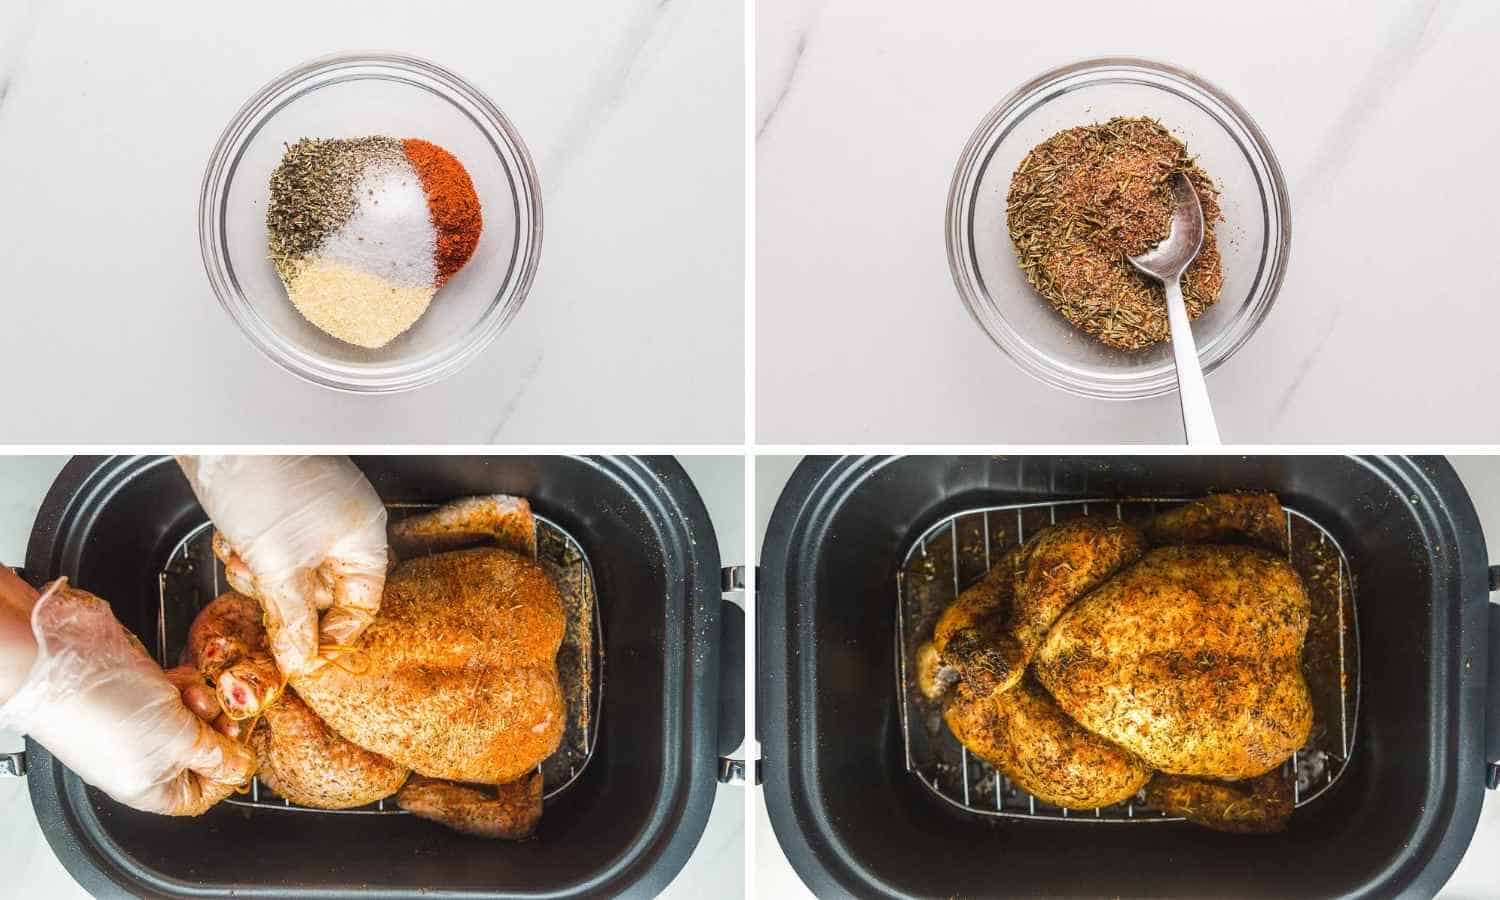 Collage of four images showing how to make the herb blend, season the chicken in the slow cooker, and cook it.